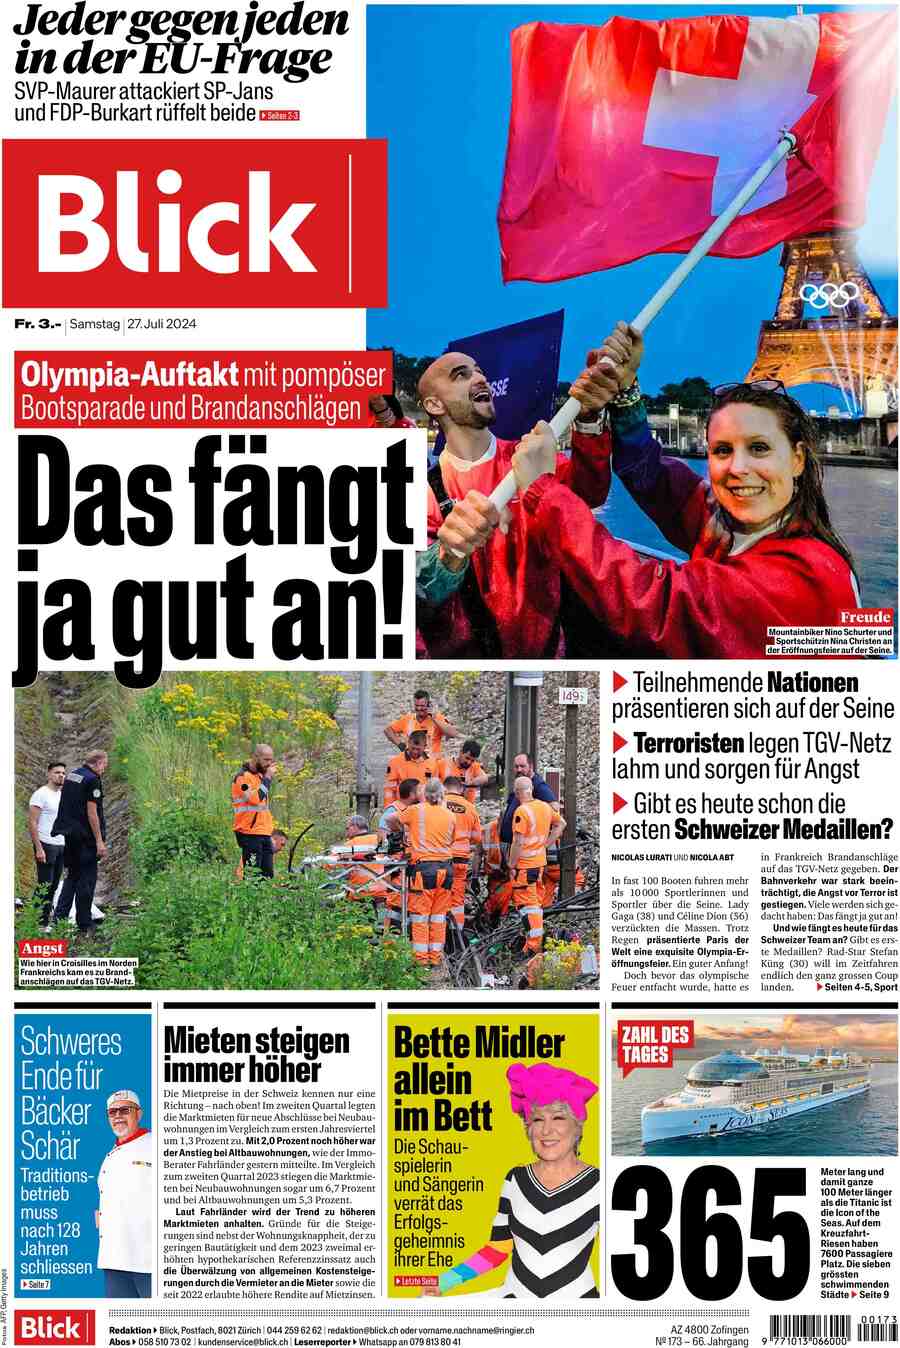 Blick - Front Page - 07/27/2024